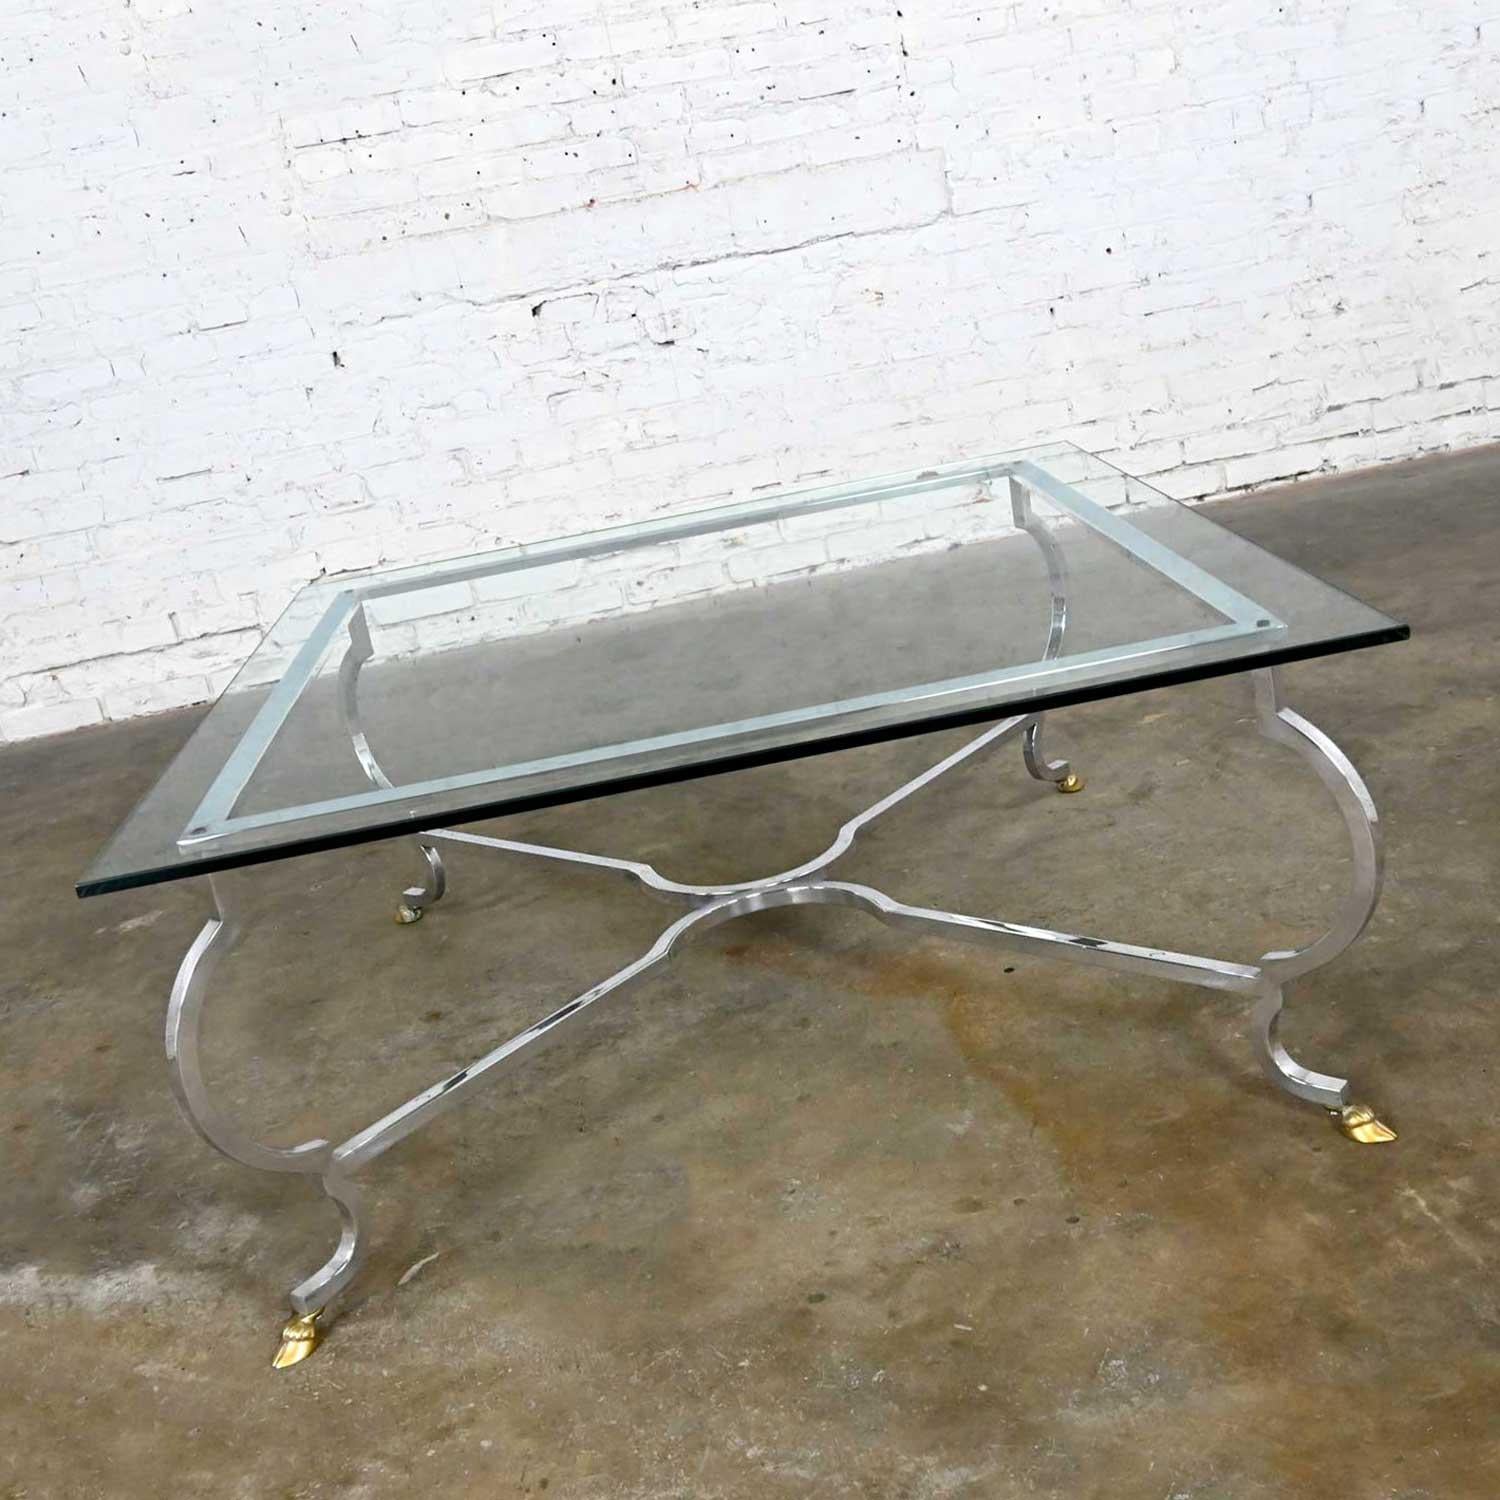 Stunning vintage Hollywood Regency ½ inch square glass top cocktail table with a polished aluminum base and polished solid brass hoof feet in the style of La Barge. Beautiful condition, keeping in mind that this is vintage and not new so will have